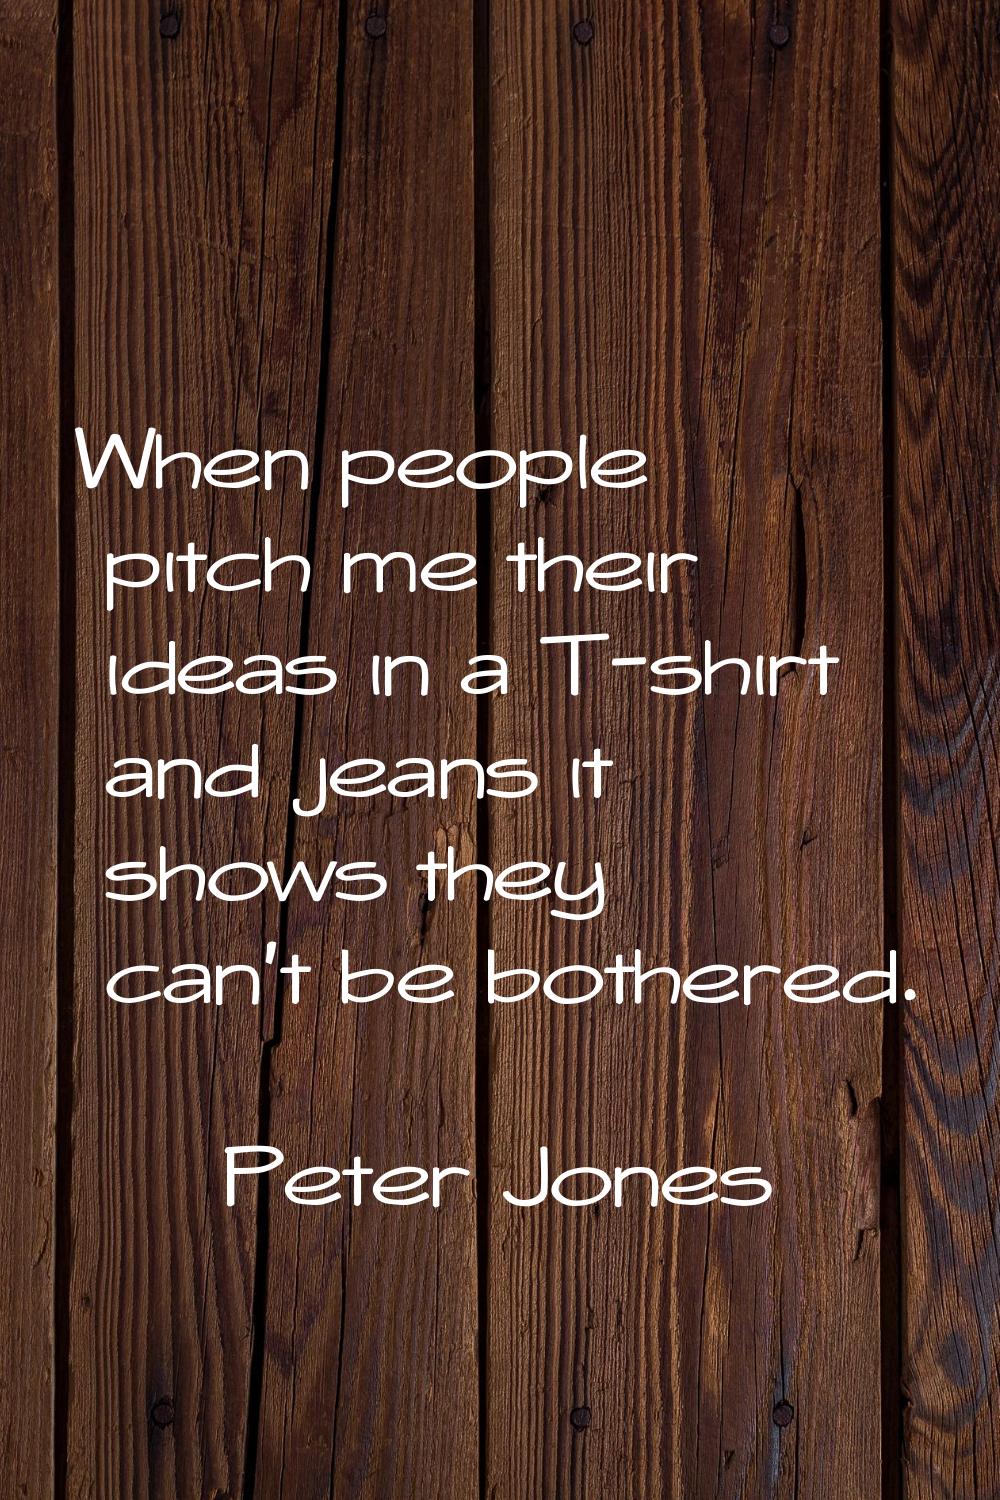 When people pitch me their ideas in a T-shirt and jeans it shows they can't be bothered.